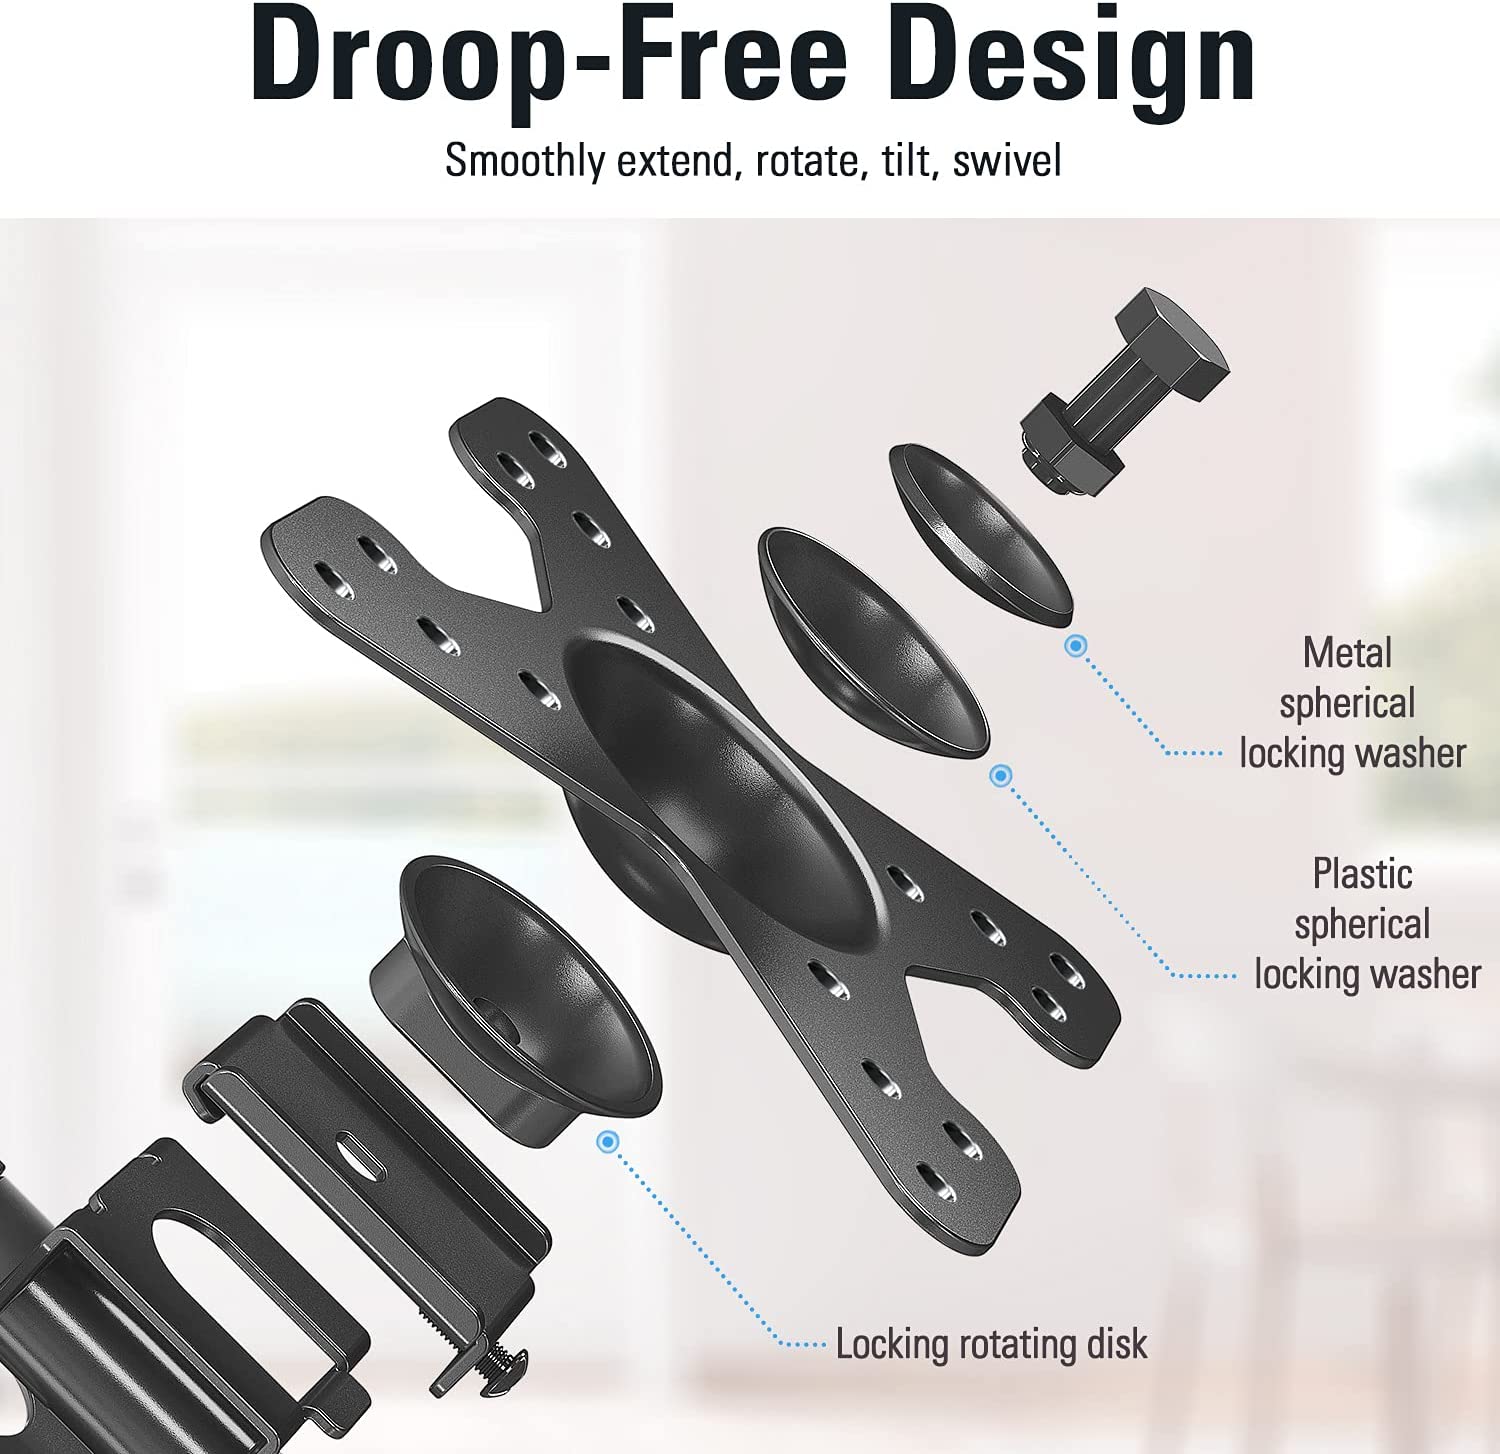 droop-free design to extend, rotate, tilt, and swivel smoothly